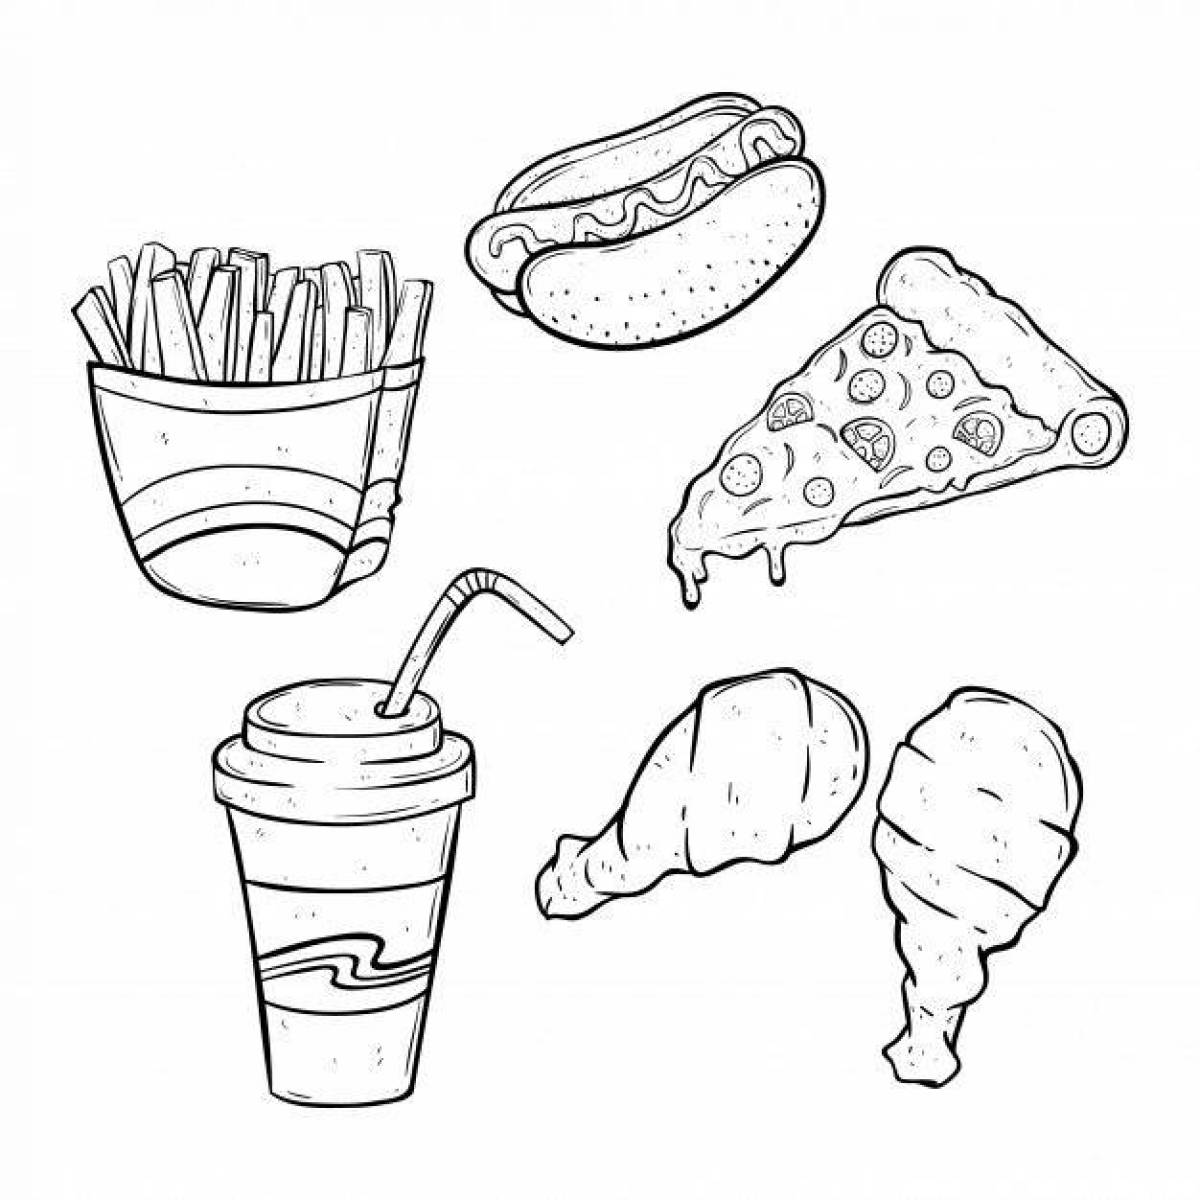 Spicy fast food coloring page